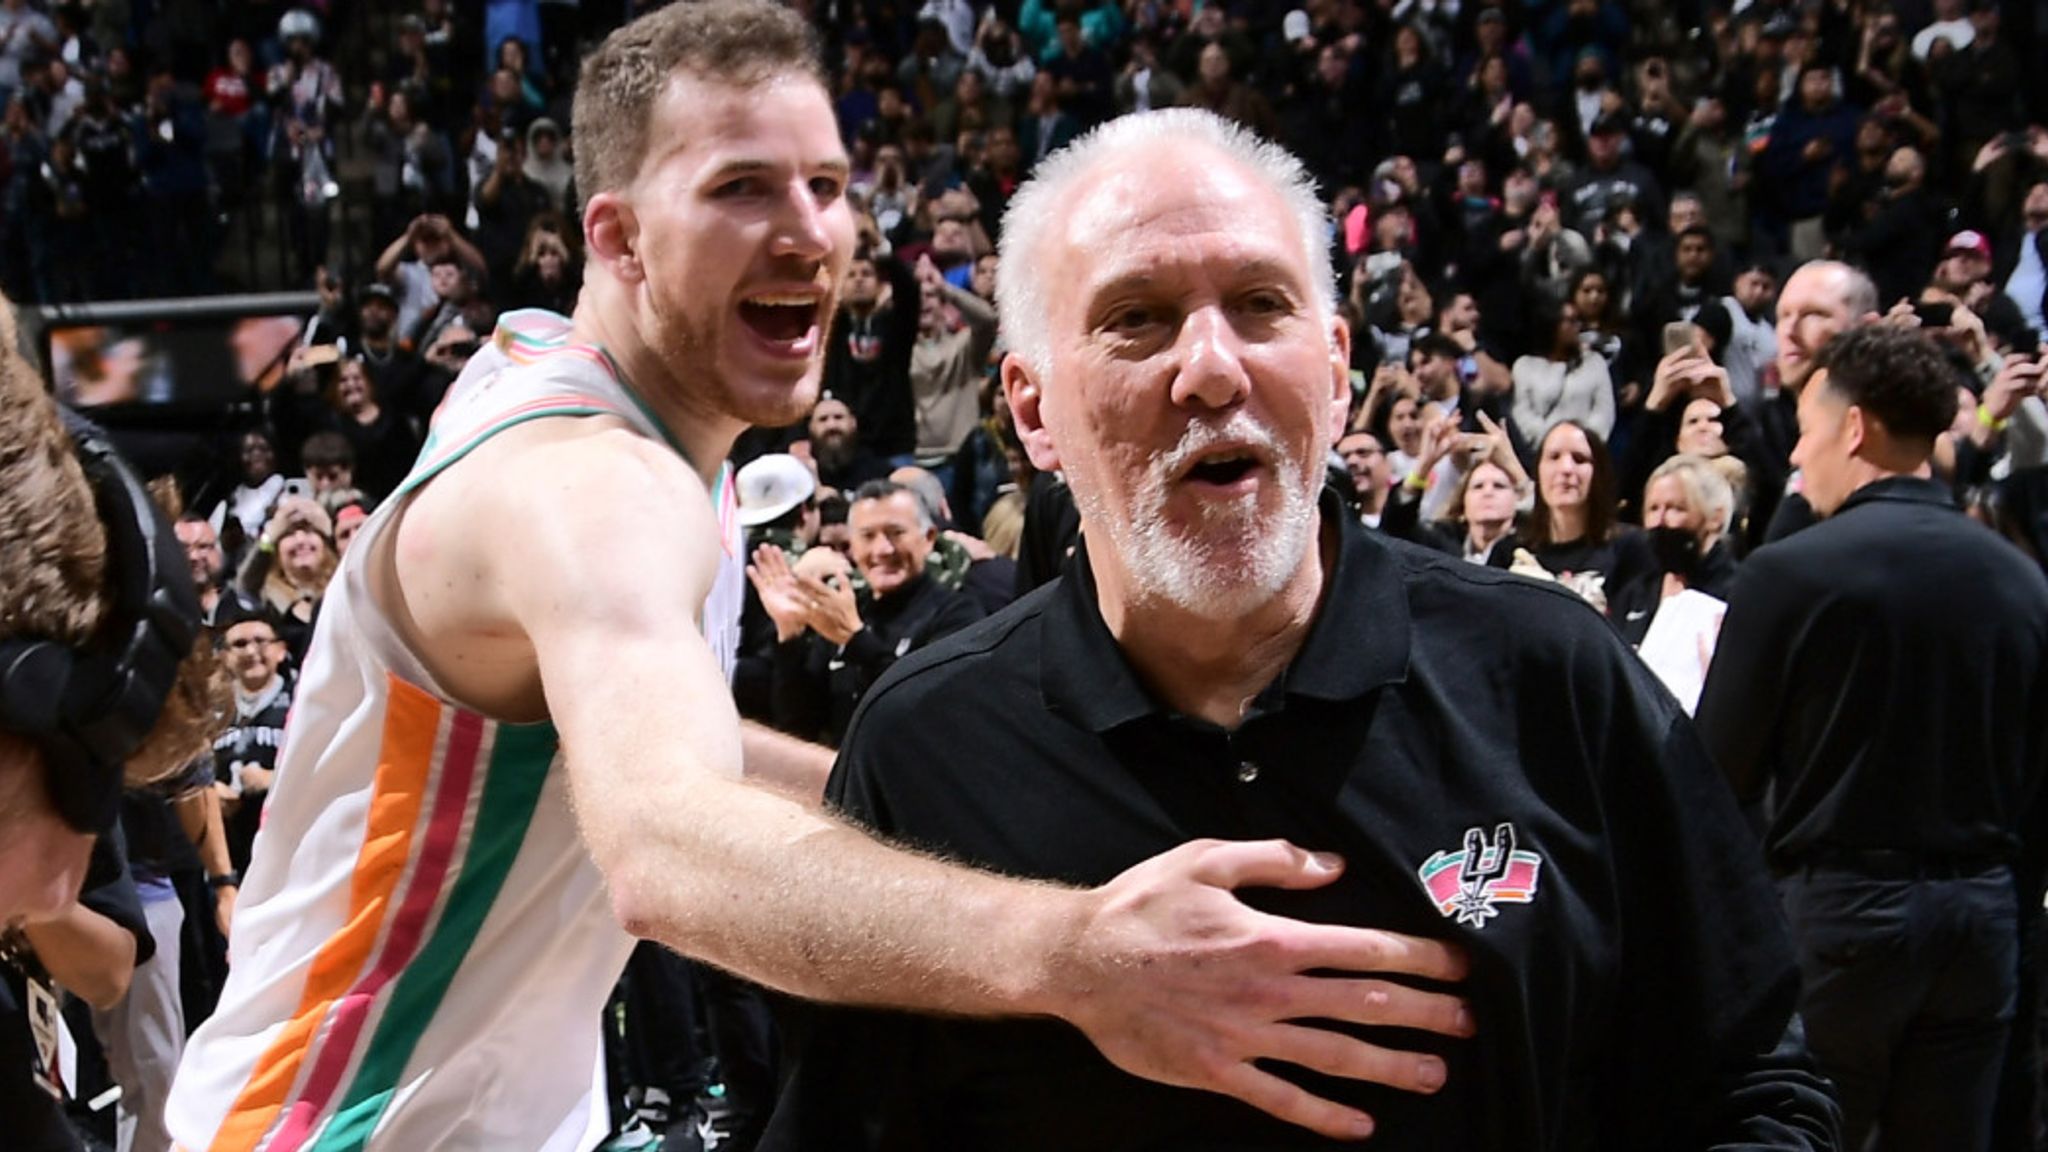 April 3, 2022: San Antonio Spurs head coach Gregg Popovich during an NBA  game between the Spurs and the Trail Blazers on April 3, 2022 in San  Antonio, Texas. The Spurs won